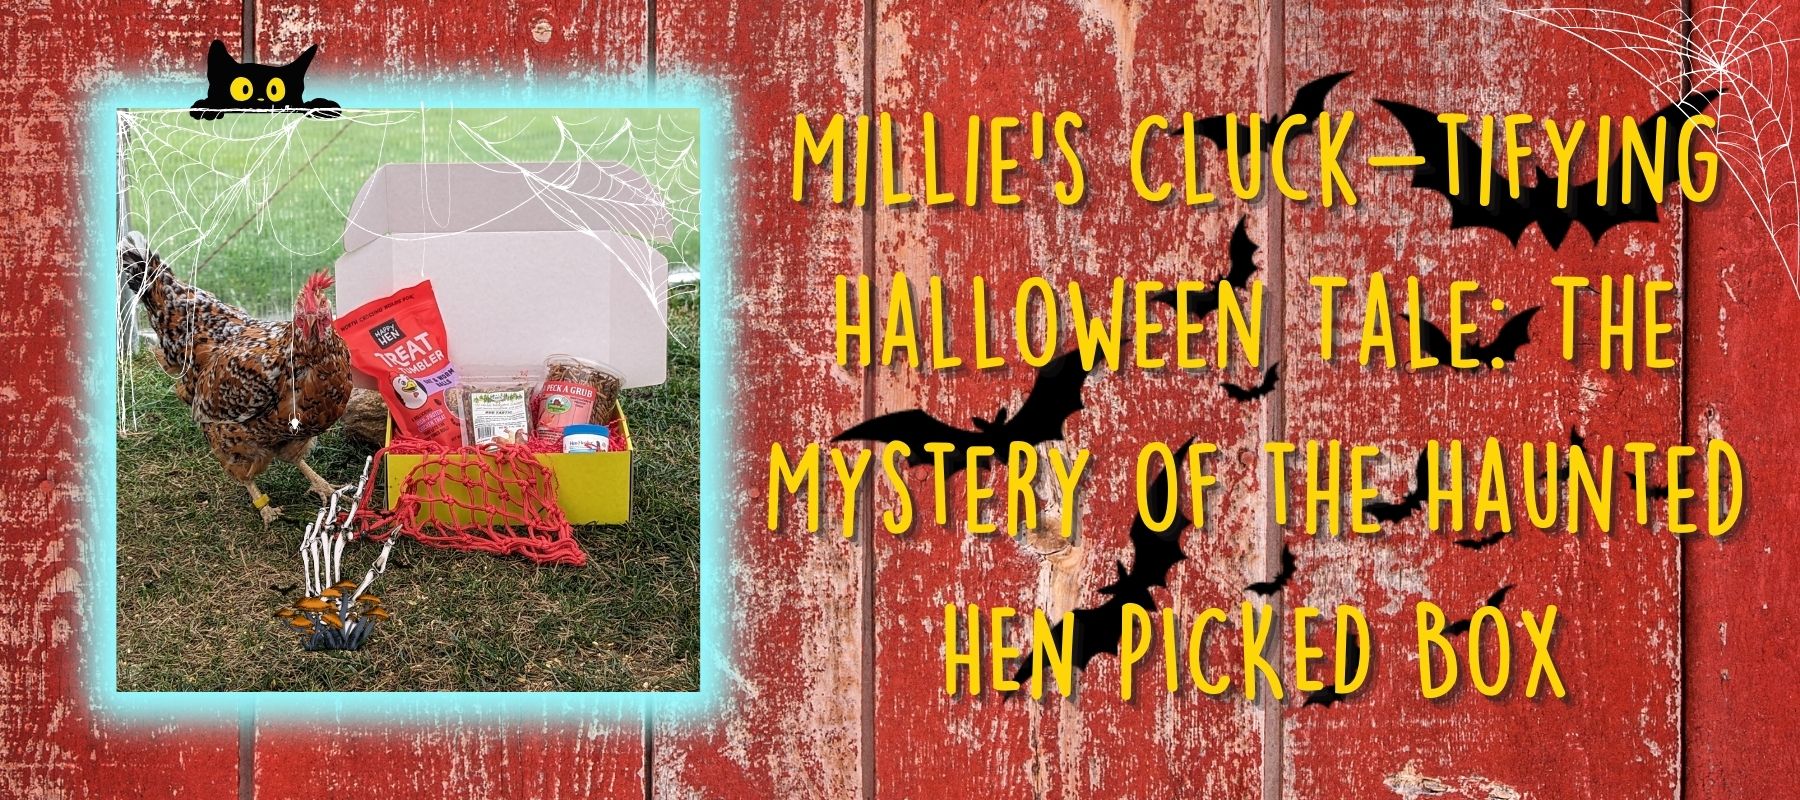 Millie's Cluck-tifying Halloween Tale: The Mystery of the Haunted HEN PICKED Box